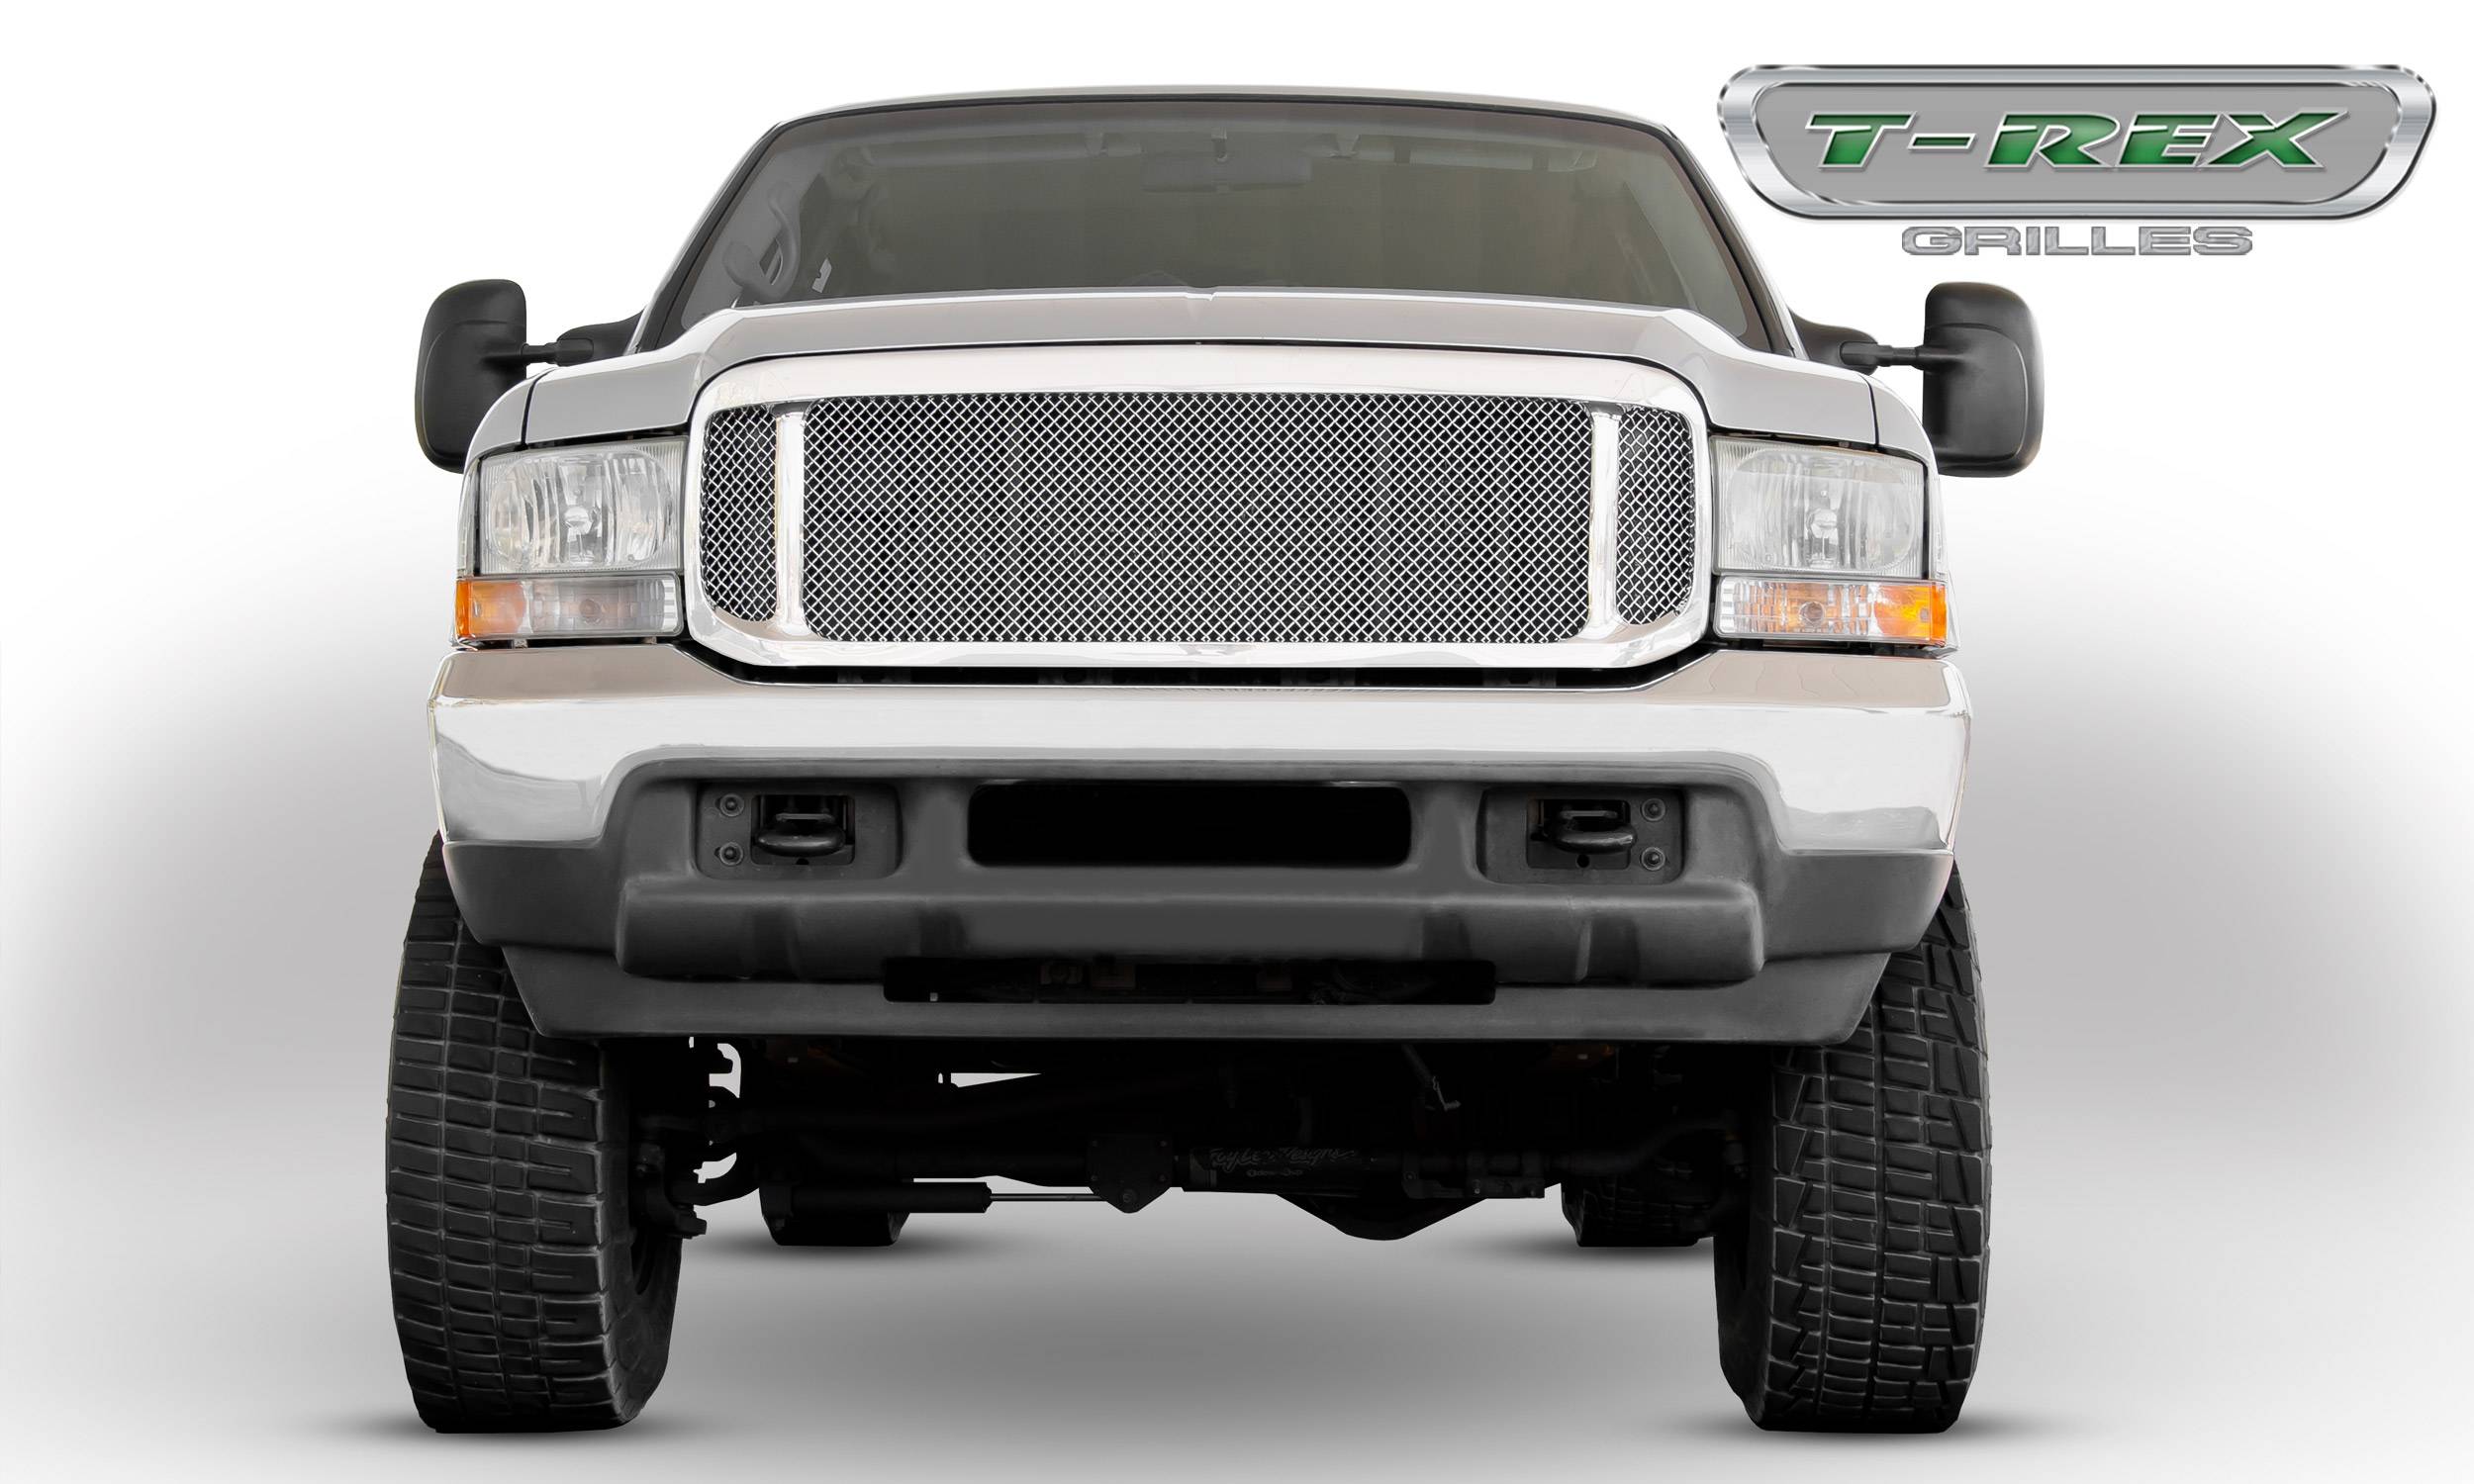 T-REX Grilles - 2000-2004 Excursion, Harley, 99-04 Super Duty Assembly Grille, Polished, 1 Pc, Replacement - Part # 50571